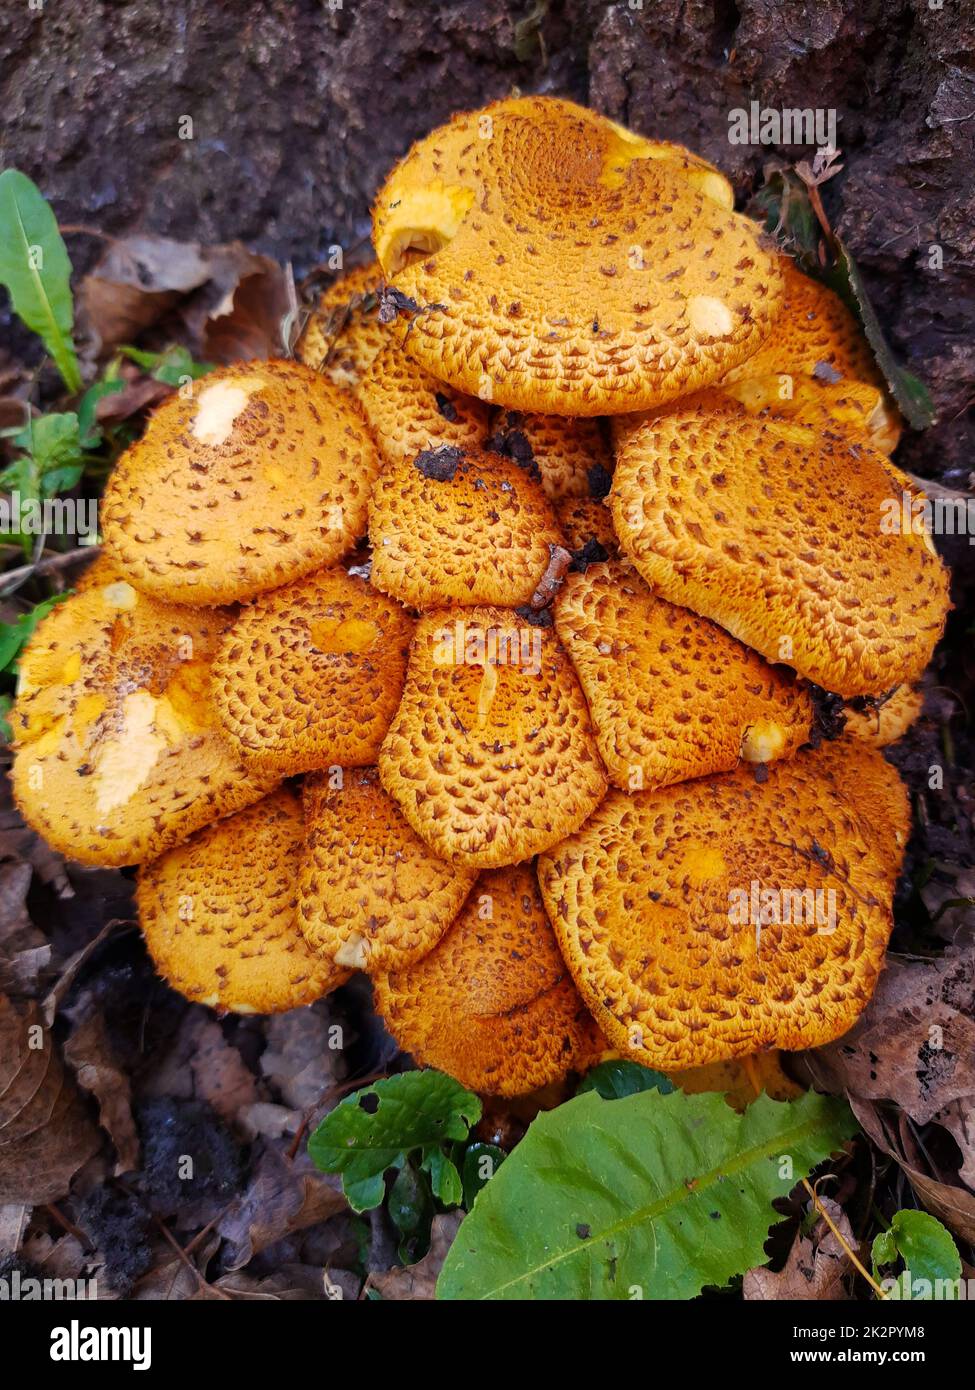 Common scaly fungus on a tree trunk Stock Photo